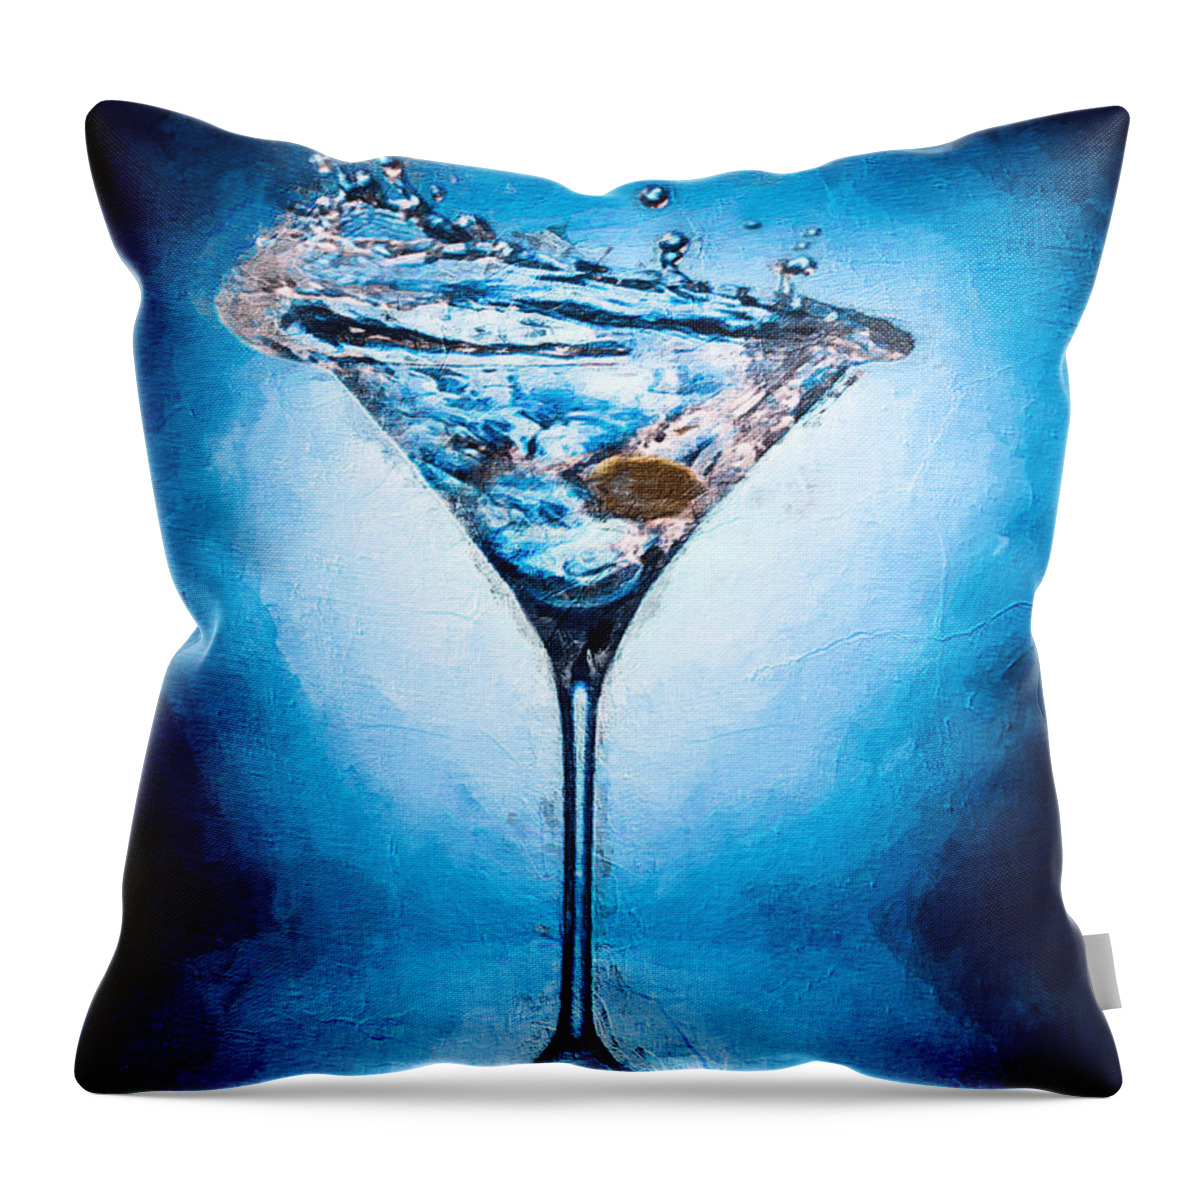 Feeling Dirty Throw Pillow featuring the painting The Painted Martini by Jon Neidert